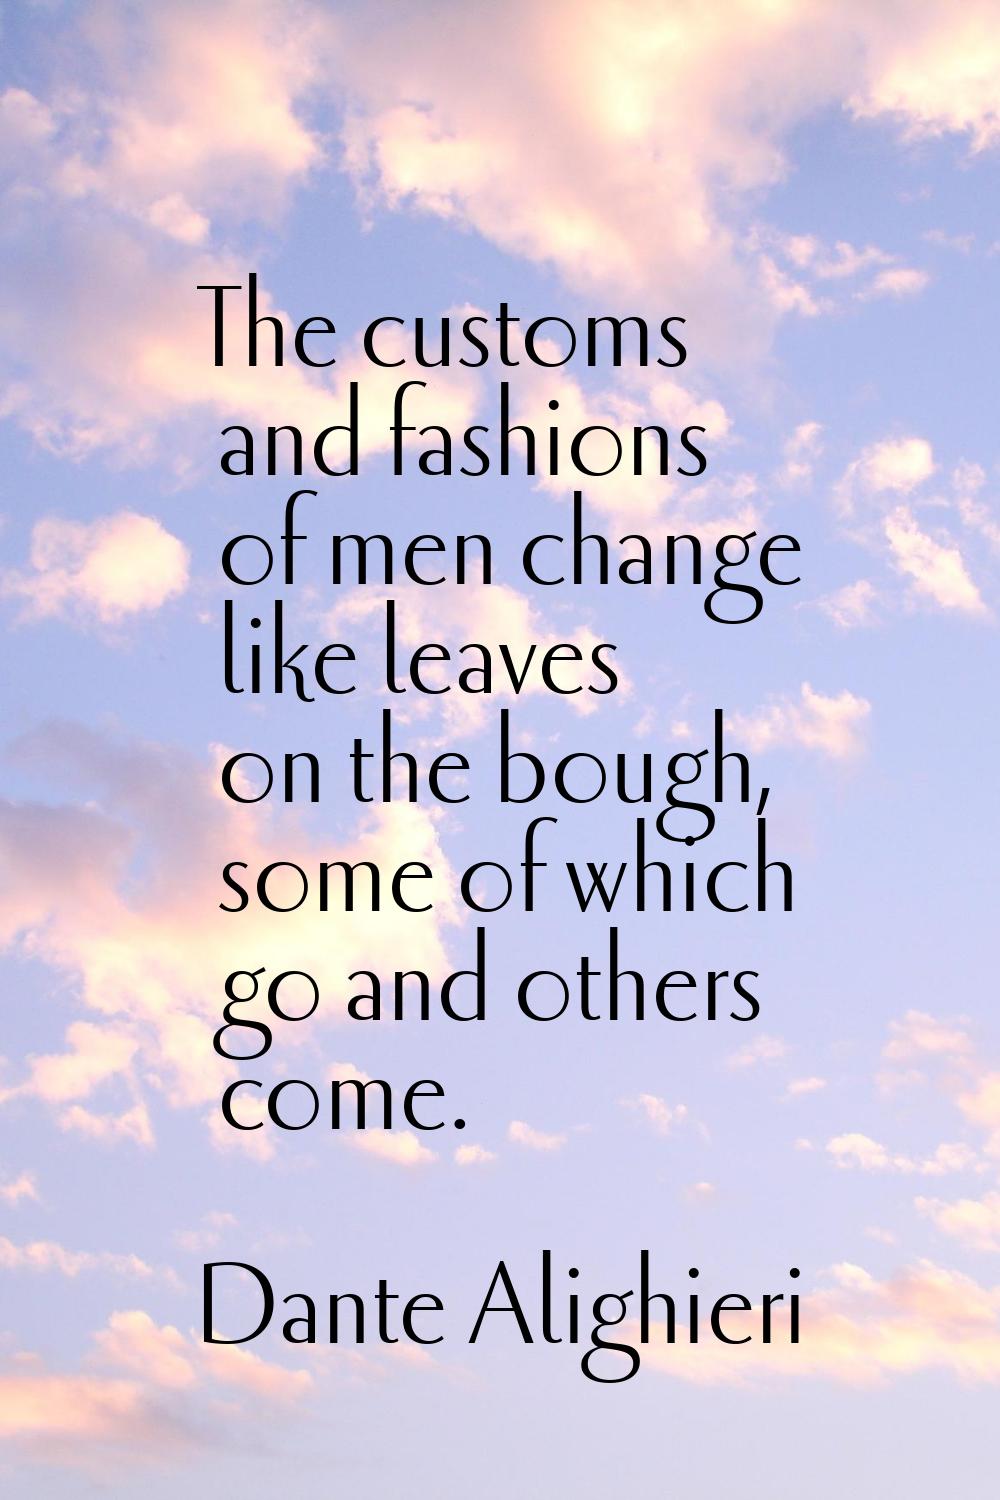 The customs and fashions of men change like leaves on the bough, some of which go and others come.